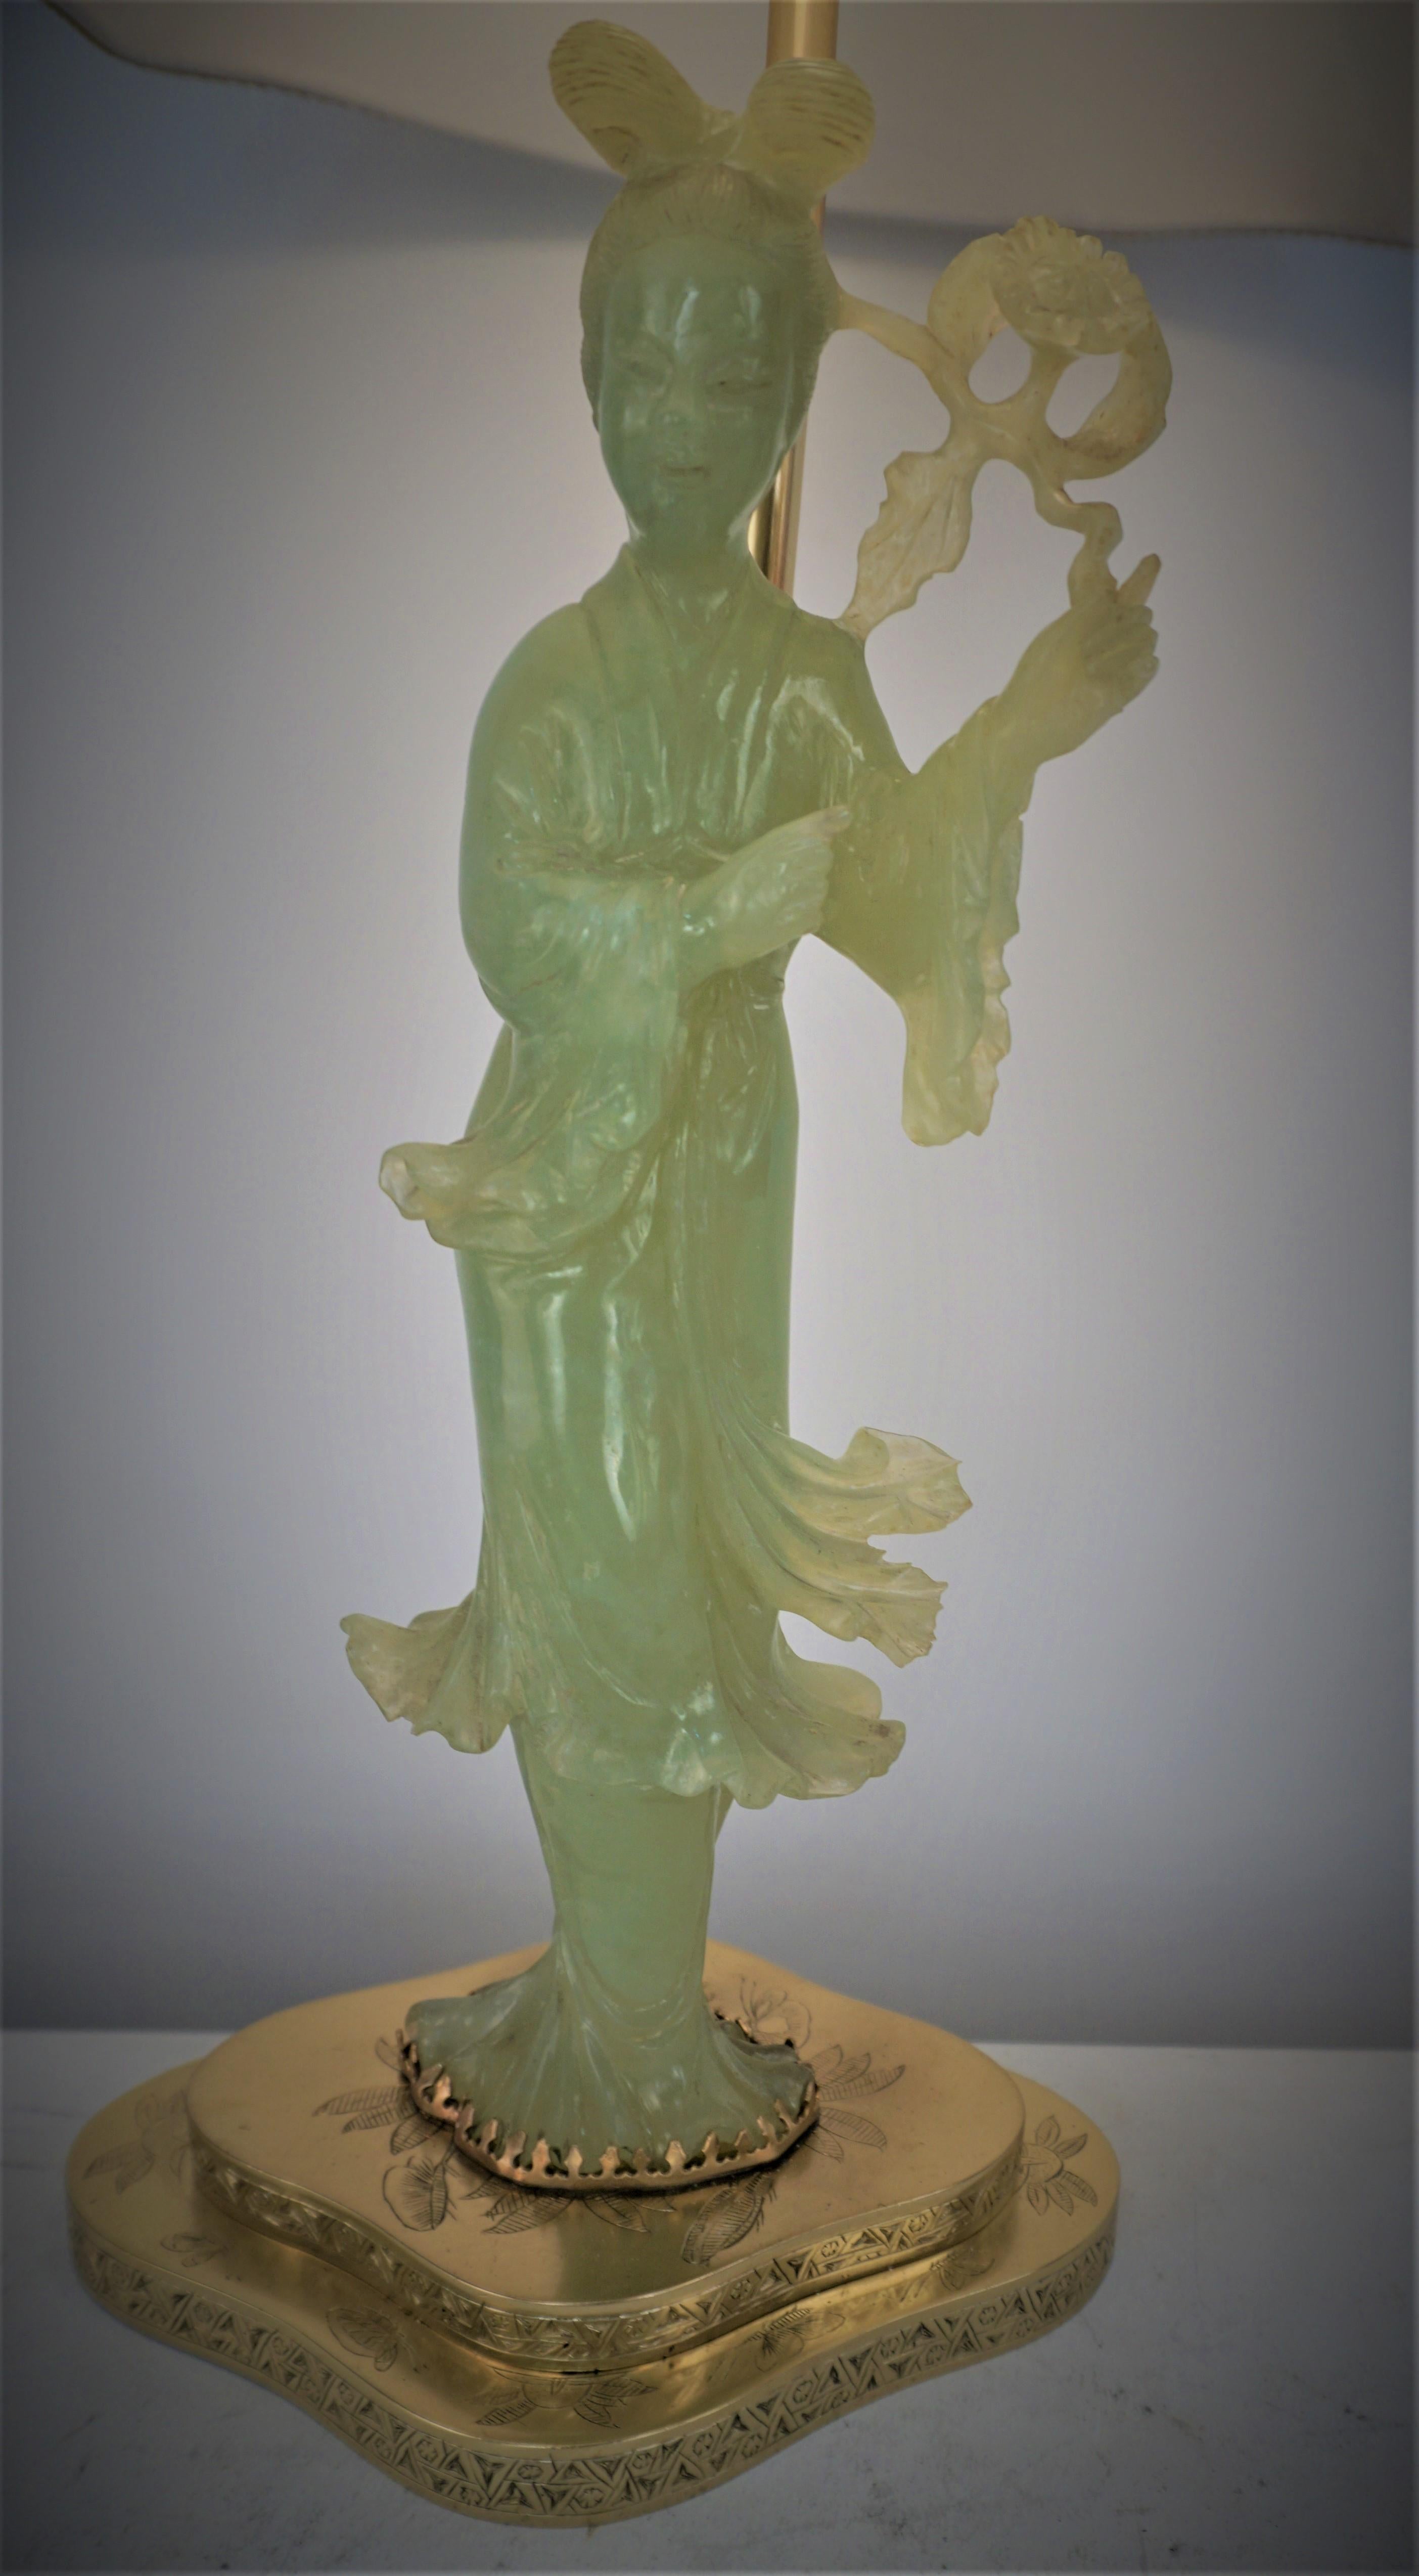 Chinese carved jade figure table Lamp, 1930's with Silk Shade, Guan Yin Figures on bronze bases.
Professionally rewired.